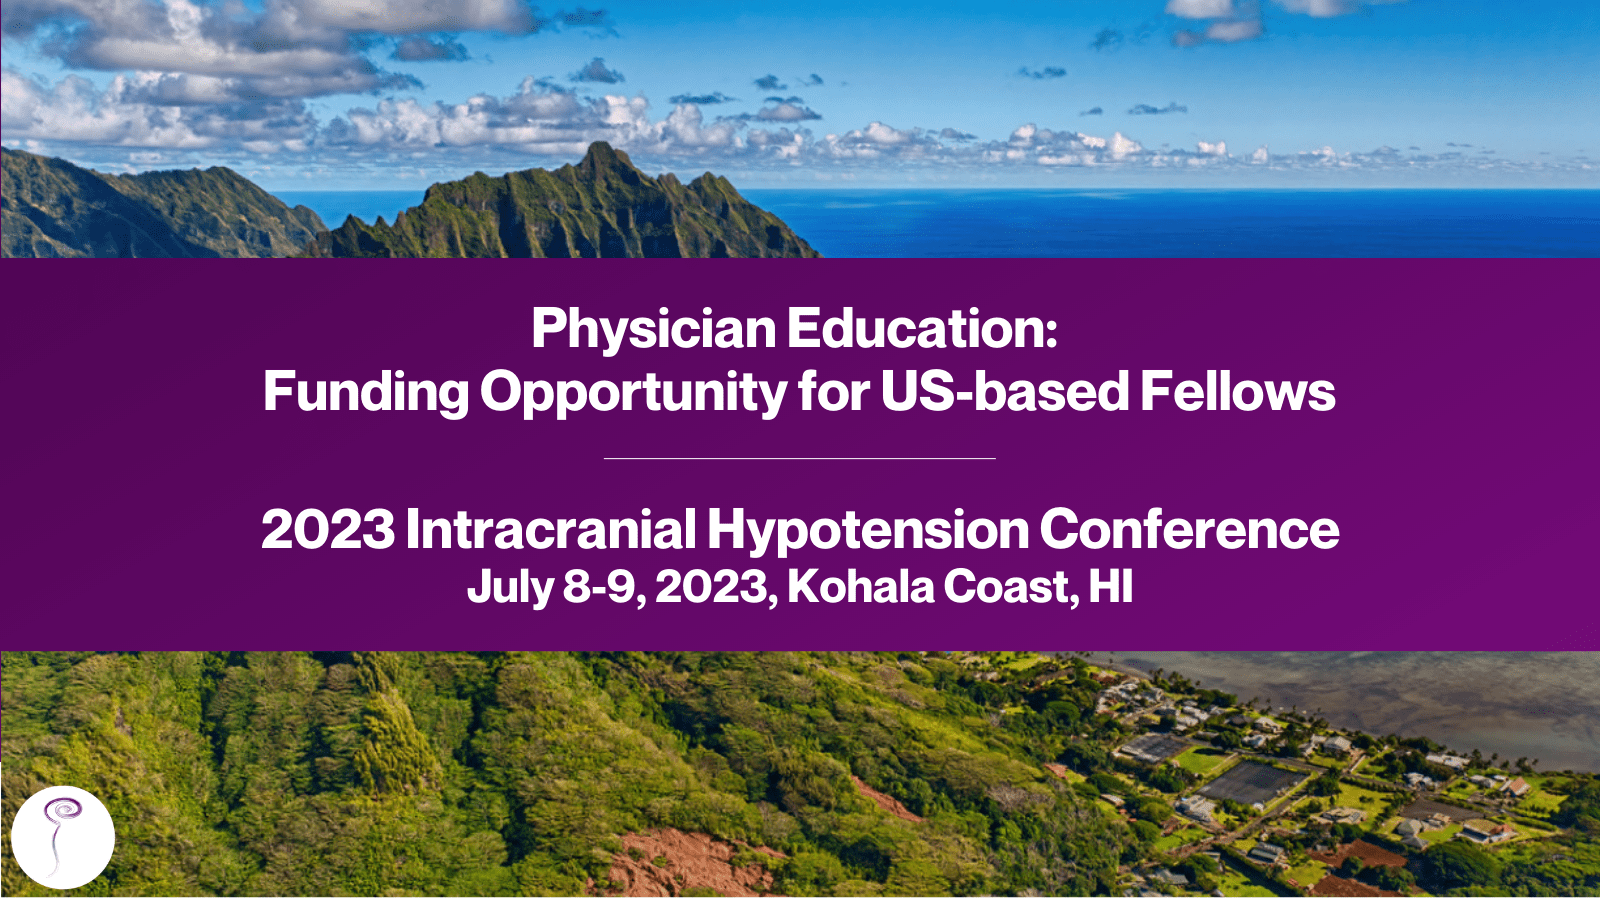 Physician education: Funding opportunity for US-based fellows